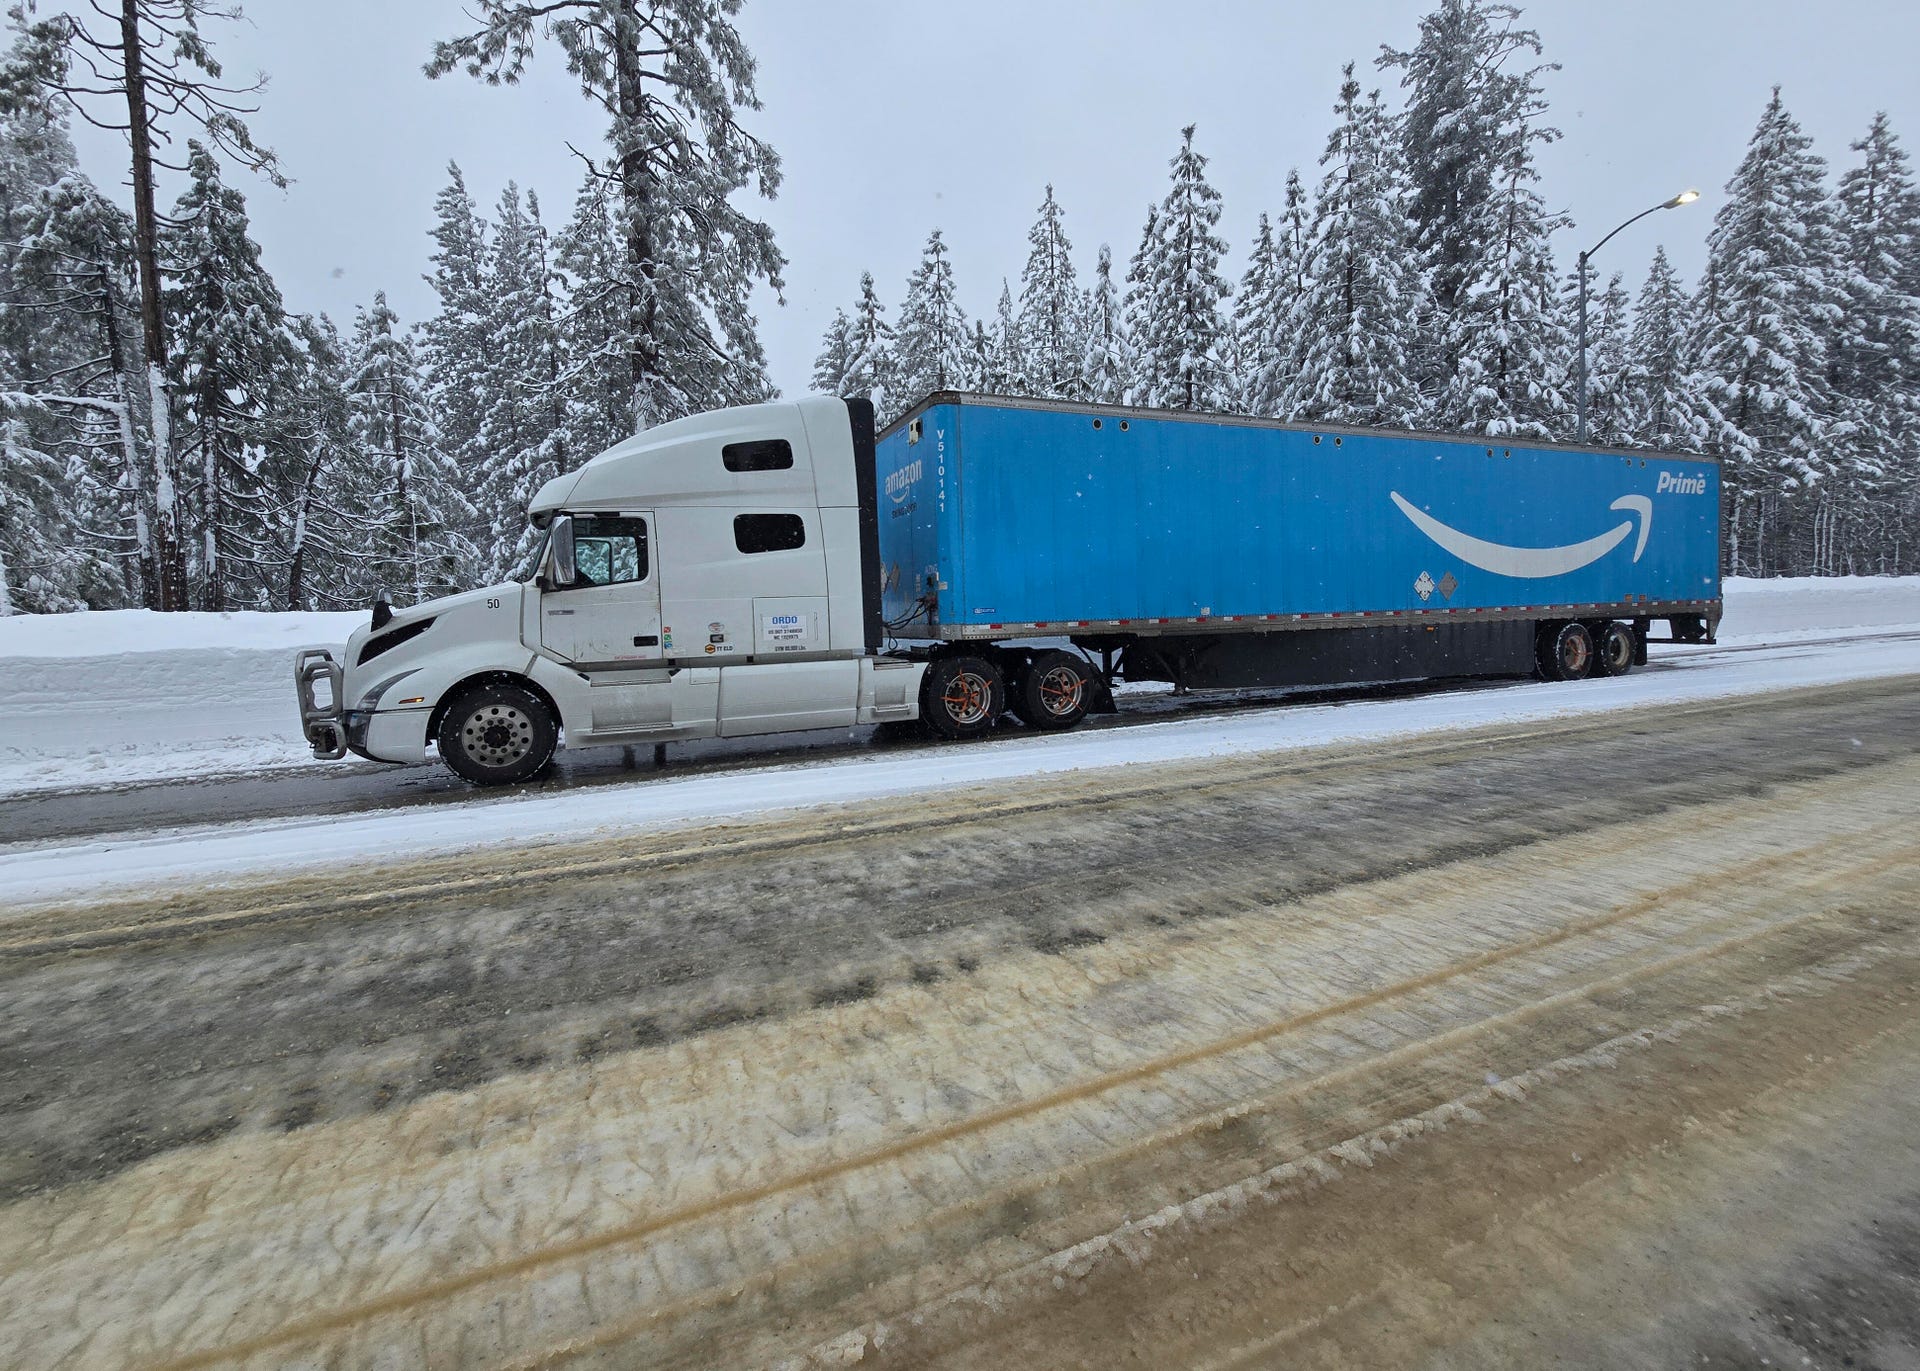 An Amazon truck stops to put on snow chains, as the driver prepares for Interstate 80 to reopen to trucks after being closed for three days.